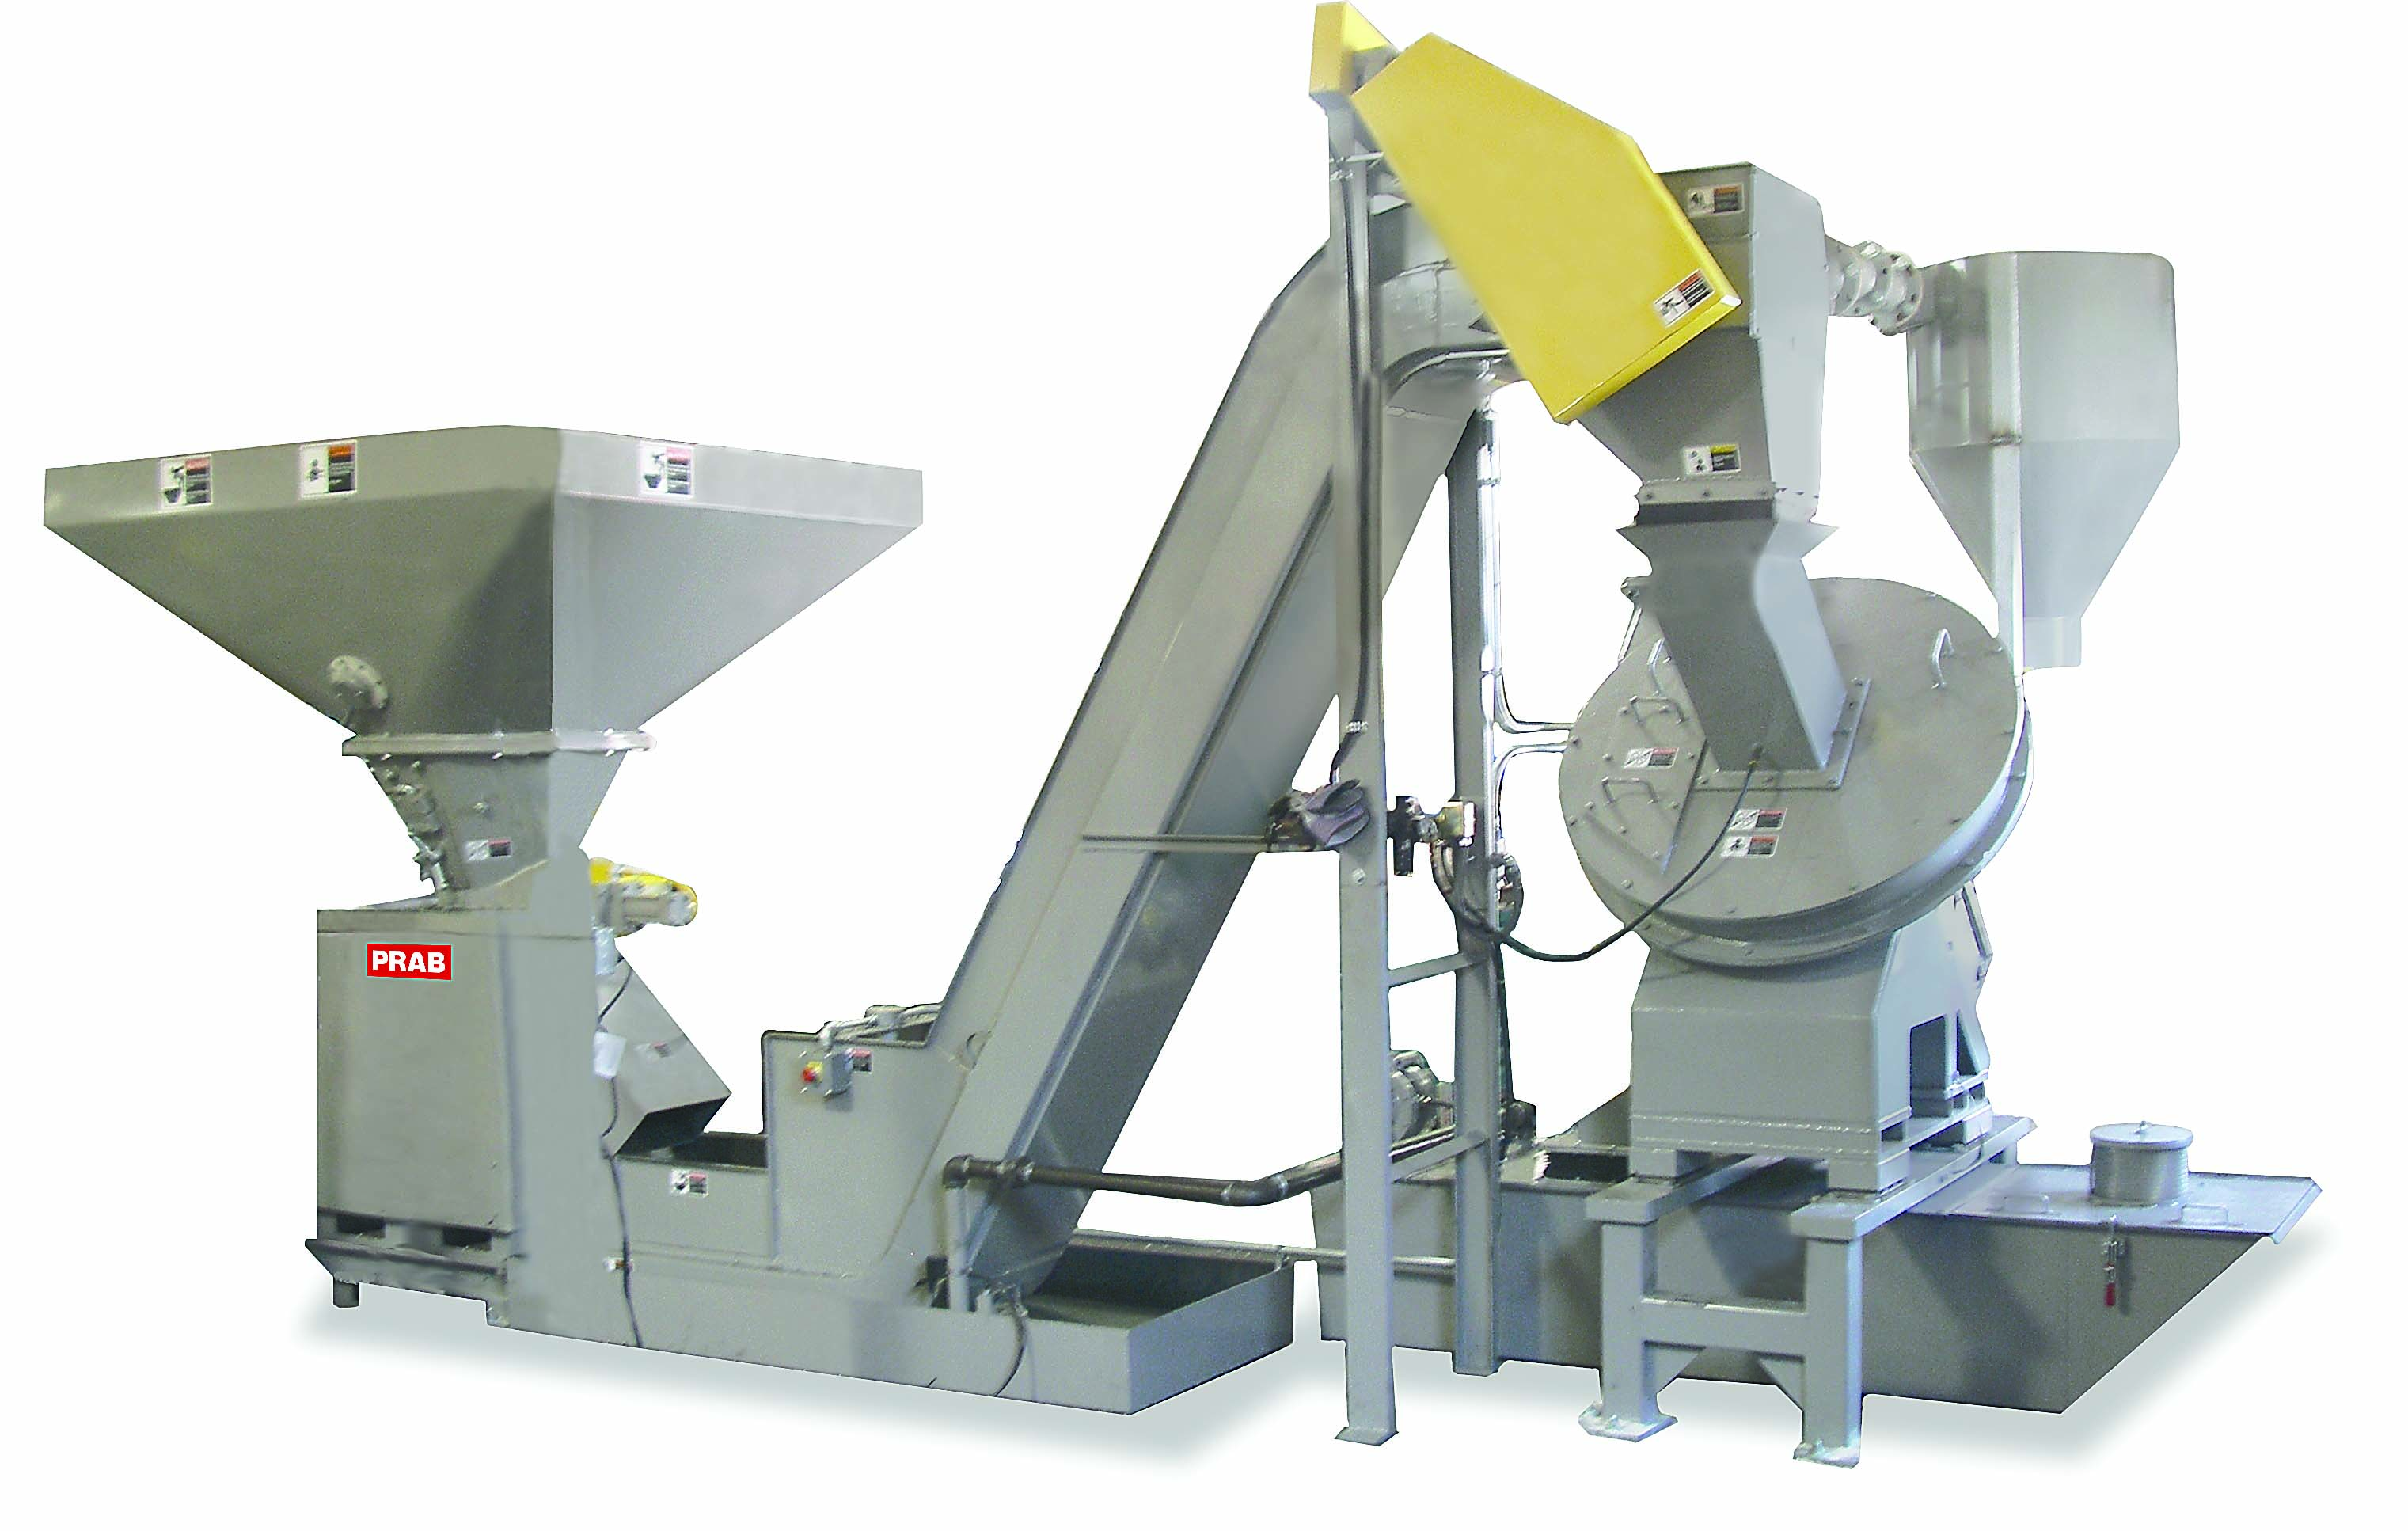 This chip handling system uses a crusher to reduce large bundles and stringy turnings before separating fluid from the chips with a wringer/centrifuge.